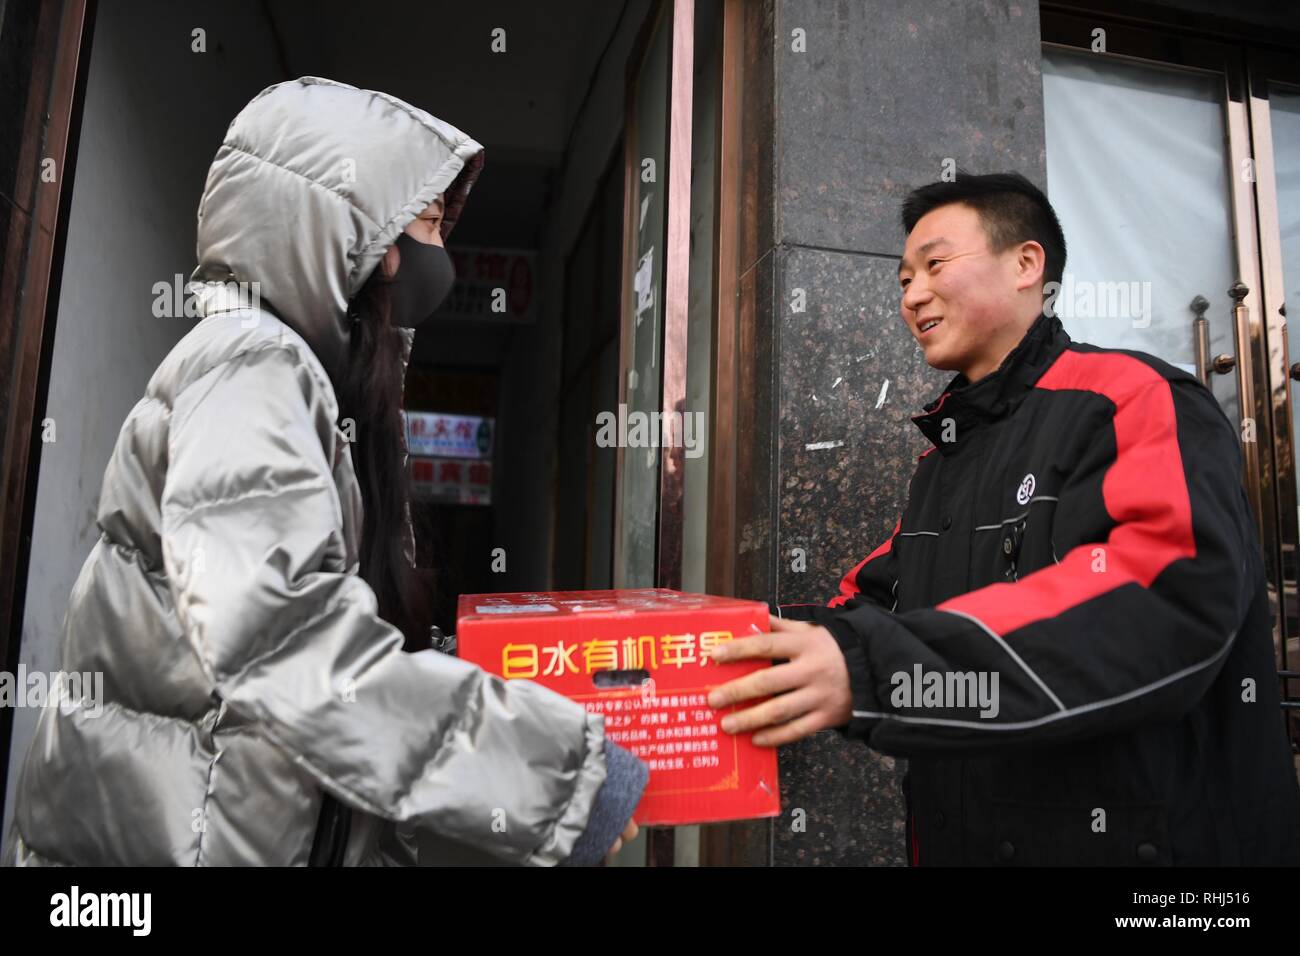 Xi'an, China's Shaanxi Province. 3rd Feb, 2019. Deliveryman Luo Feilong (R) hands a package to a customer in Xi'an, capital of northwest China's Shaanxi Province, Feb. 3, 2019. Luo Feilong, a 31-year-old deliveryman from Shaanxi Province, has been delivering packages in a community of Xi'an for four years. Luo applied for being on duty during this year's Spring Festival holiday so that other deliverymen from outside the province can return to their hometowns for family gatherings. Credit: Zhang Bowen/Xinhua/Alamy Live News Stock Photo